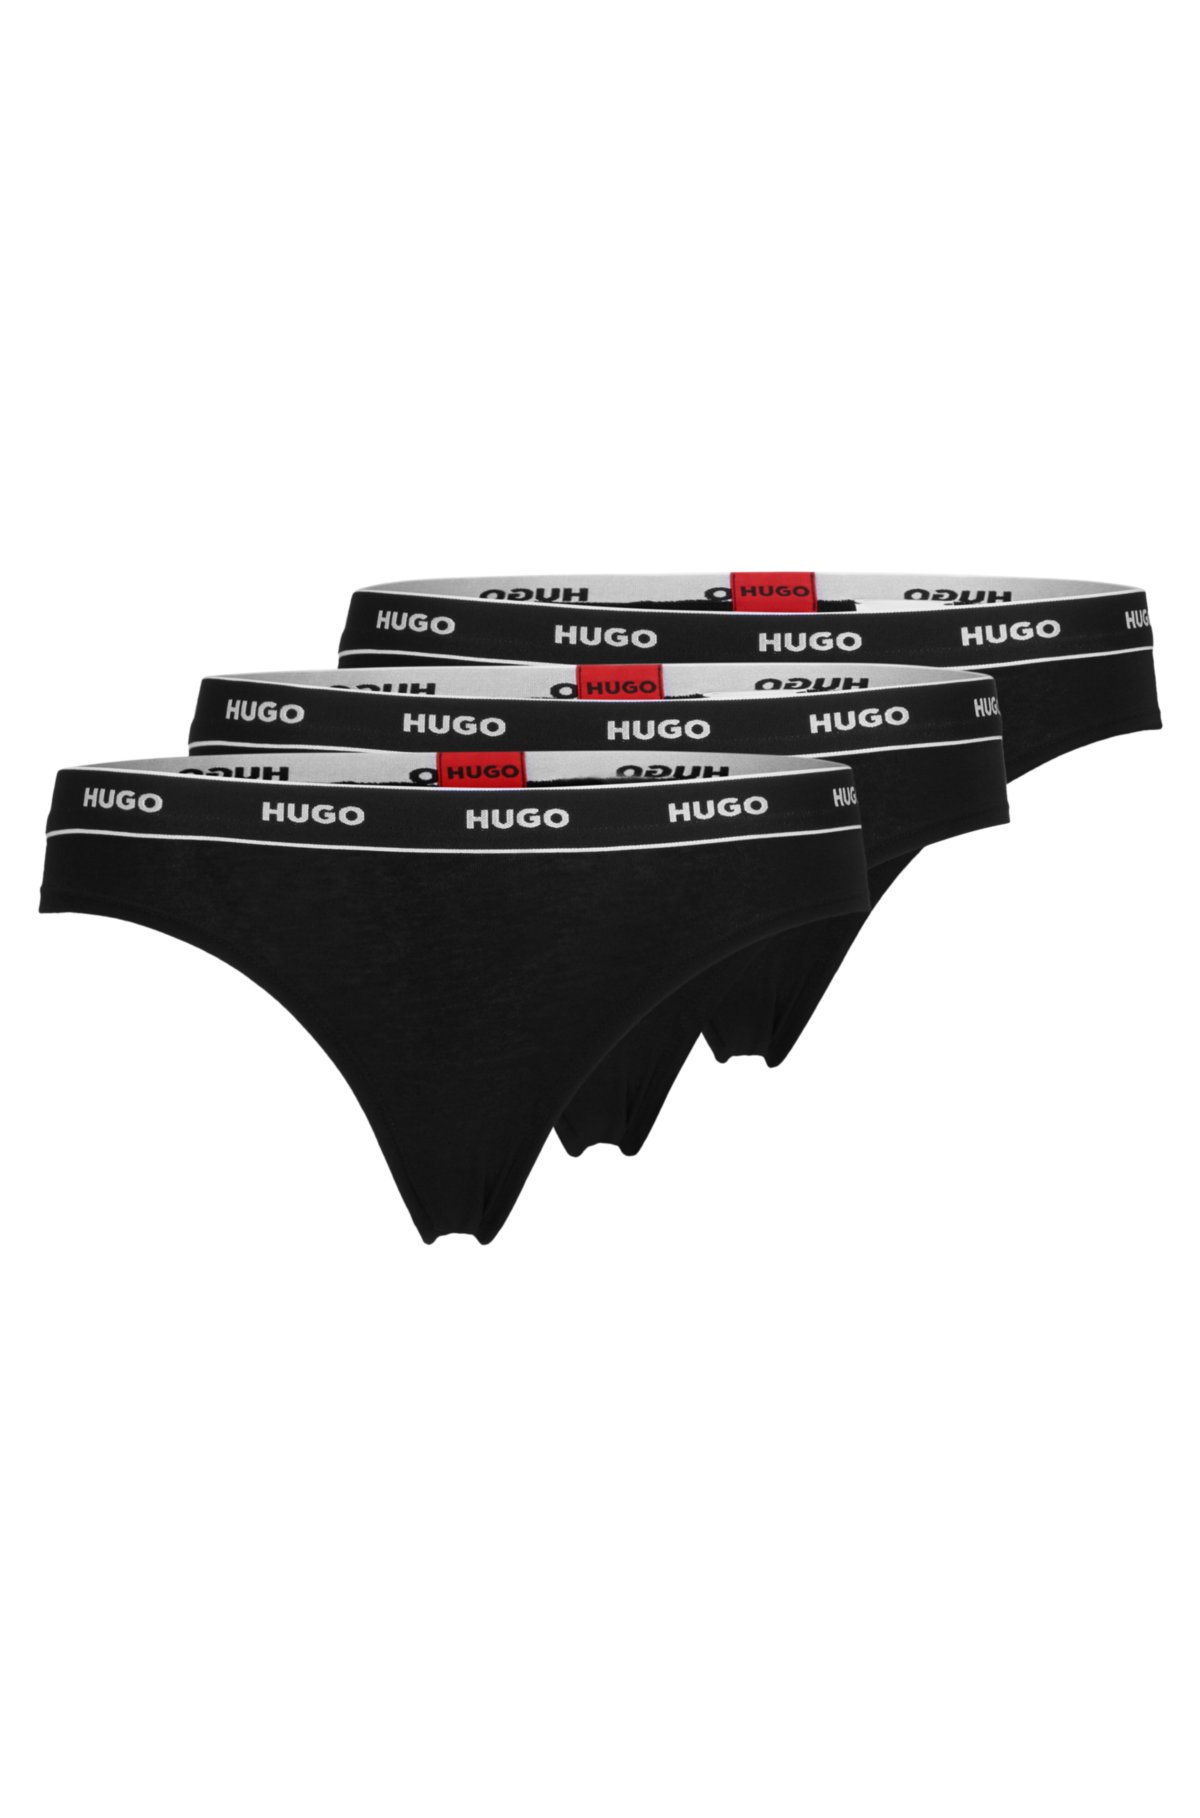 HUGO briefs logos of Three-pack thong - stretch-cotton with